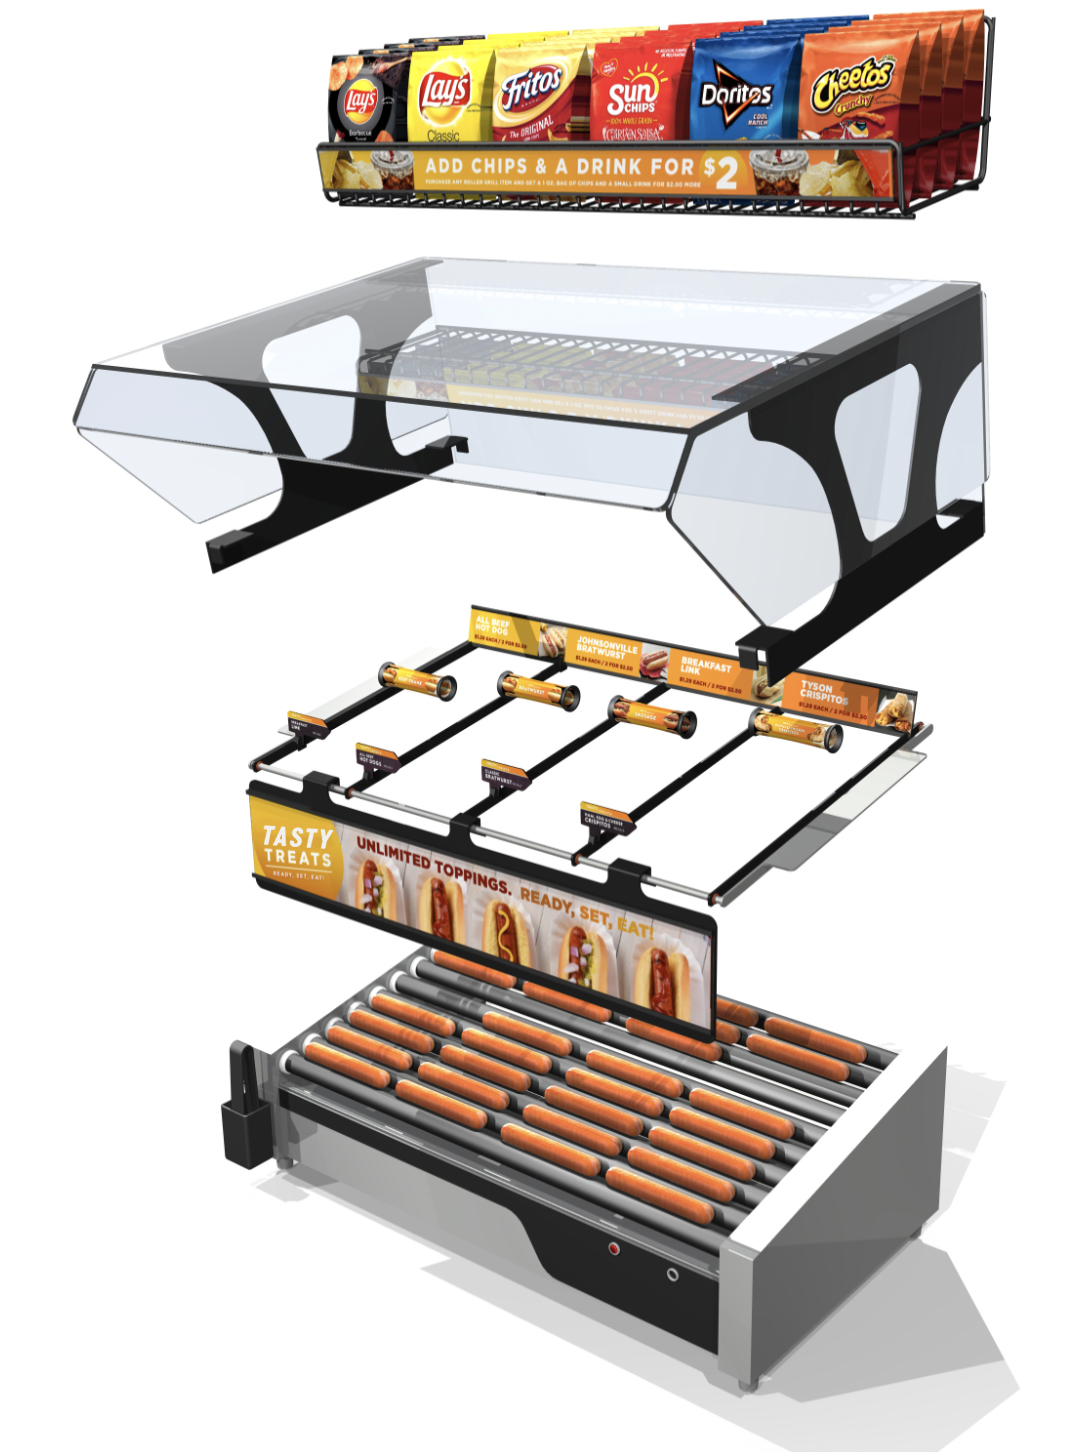 files/Exploded_Roller_Grill_Chip_Rack_-_New_Logo_c847bf7c-c4b2-43d5-a697-8eb74e1920fe.png